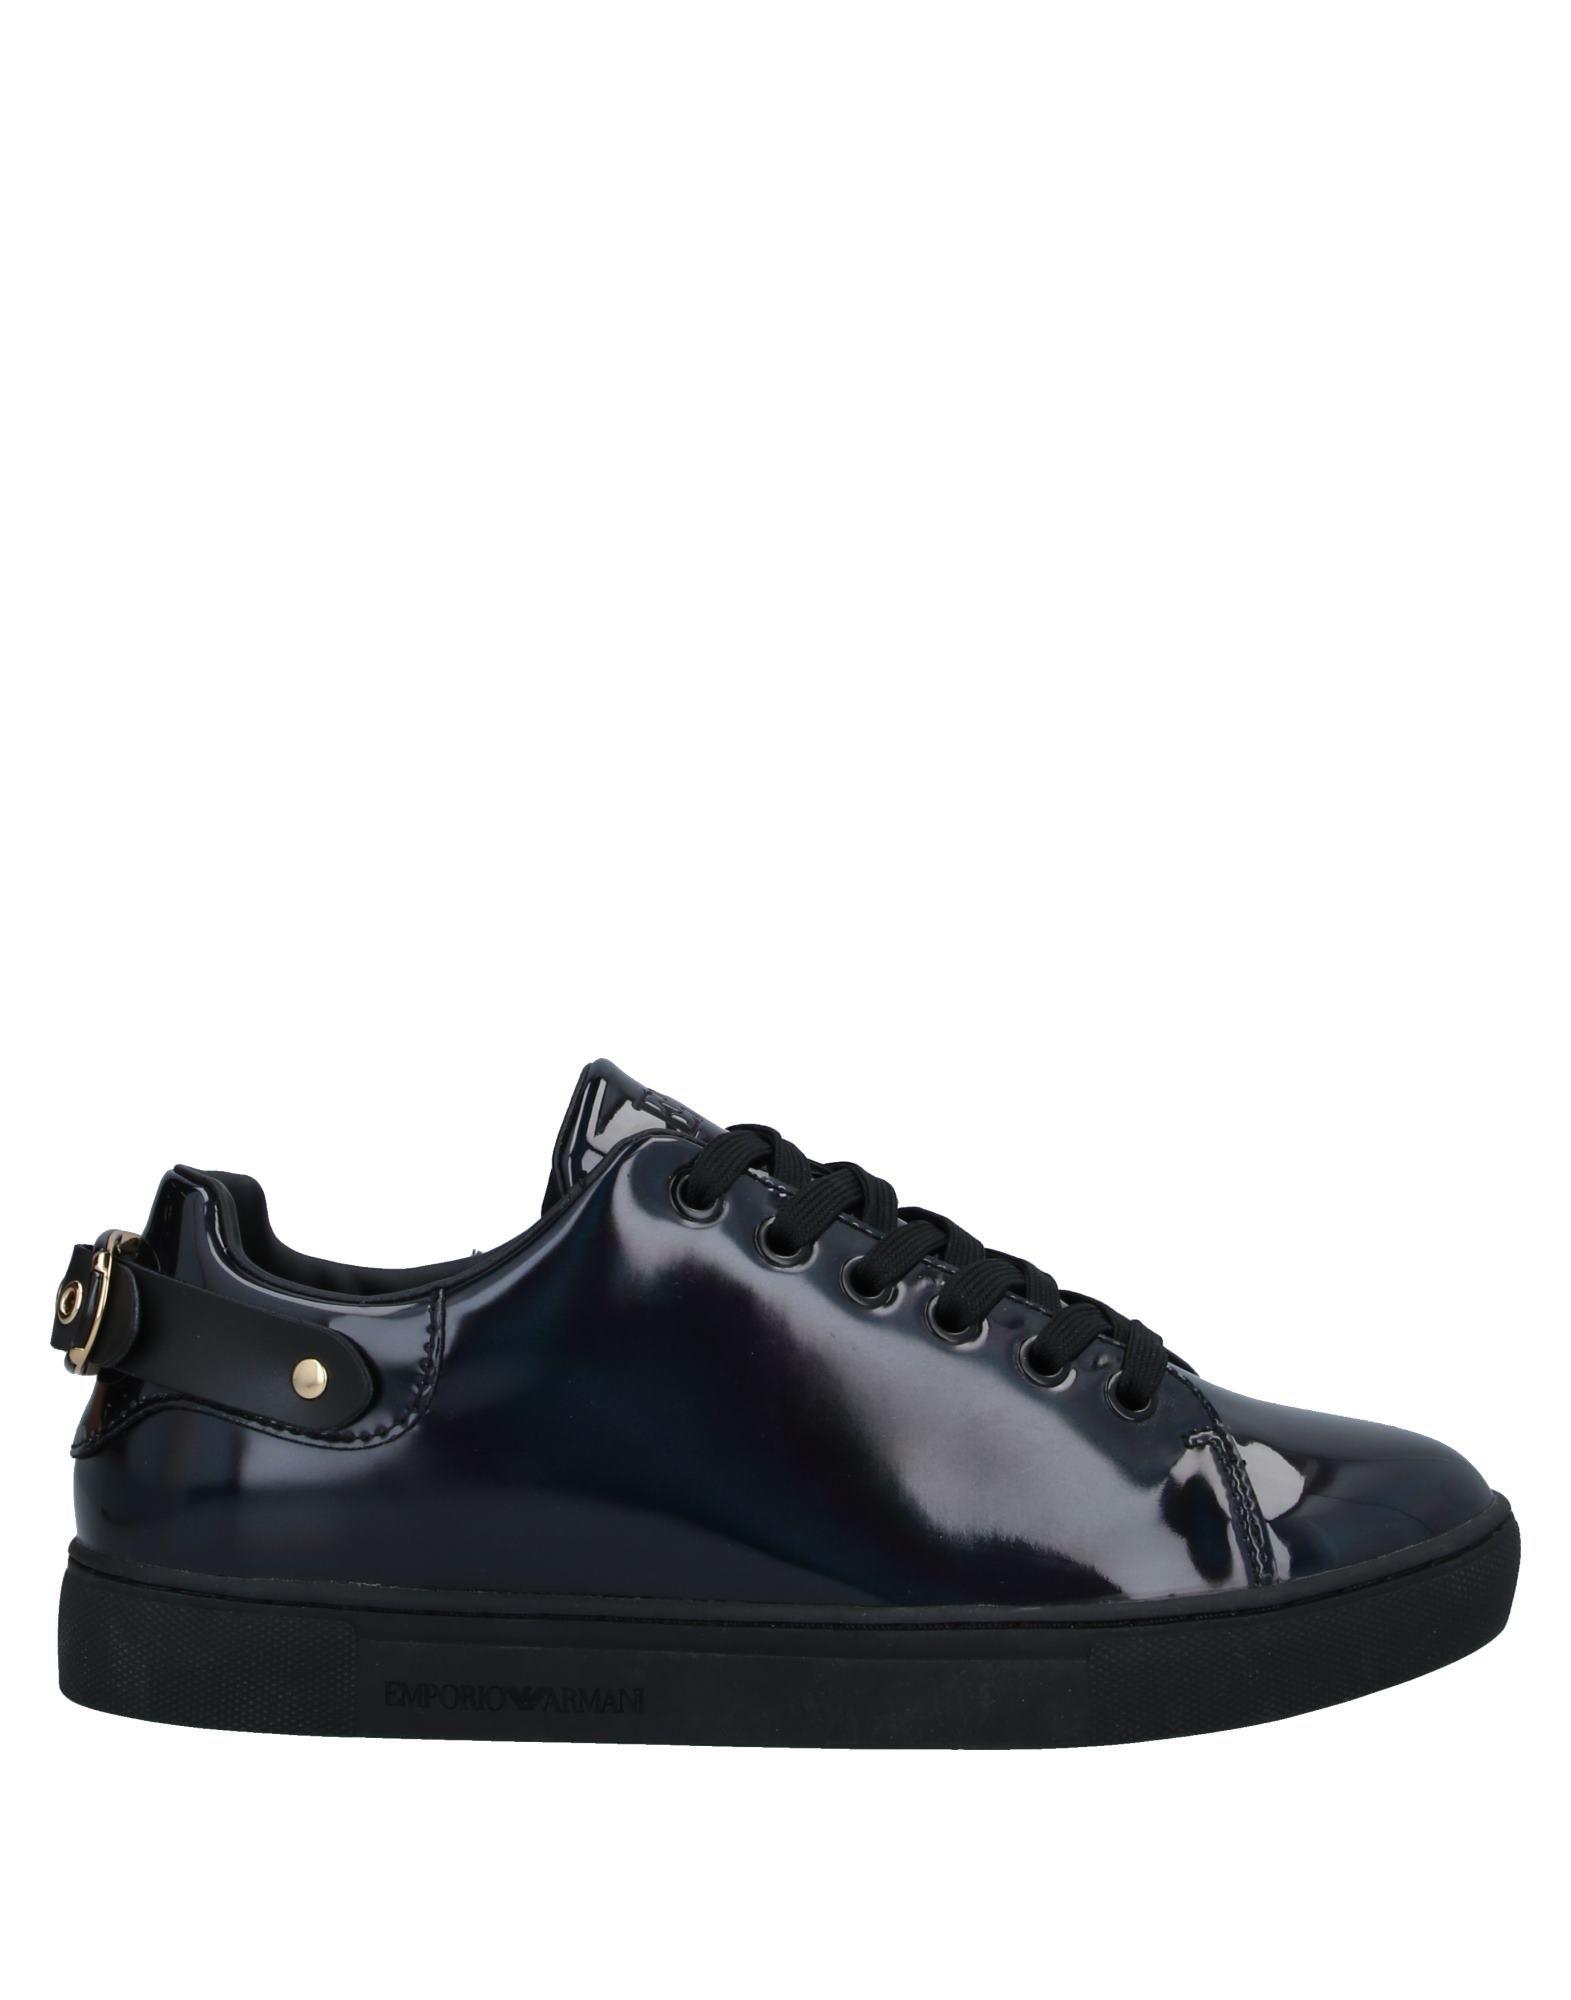 Emporio Armani Low-tops & Sneakers in Black - Lyst